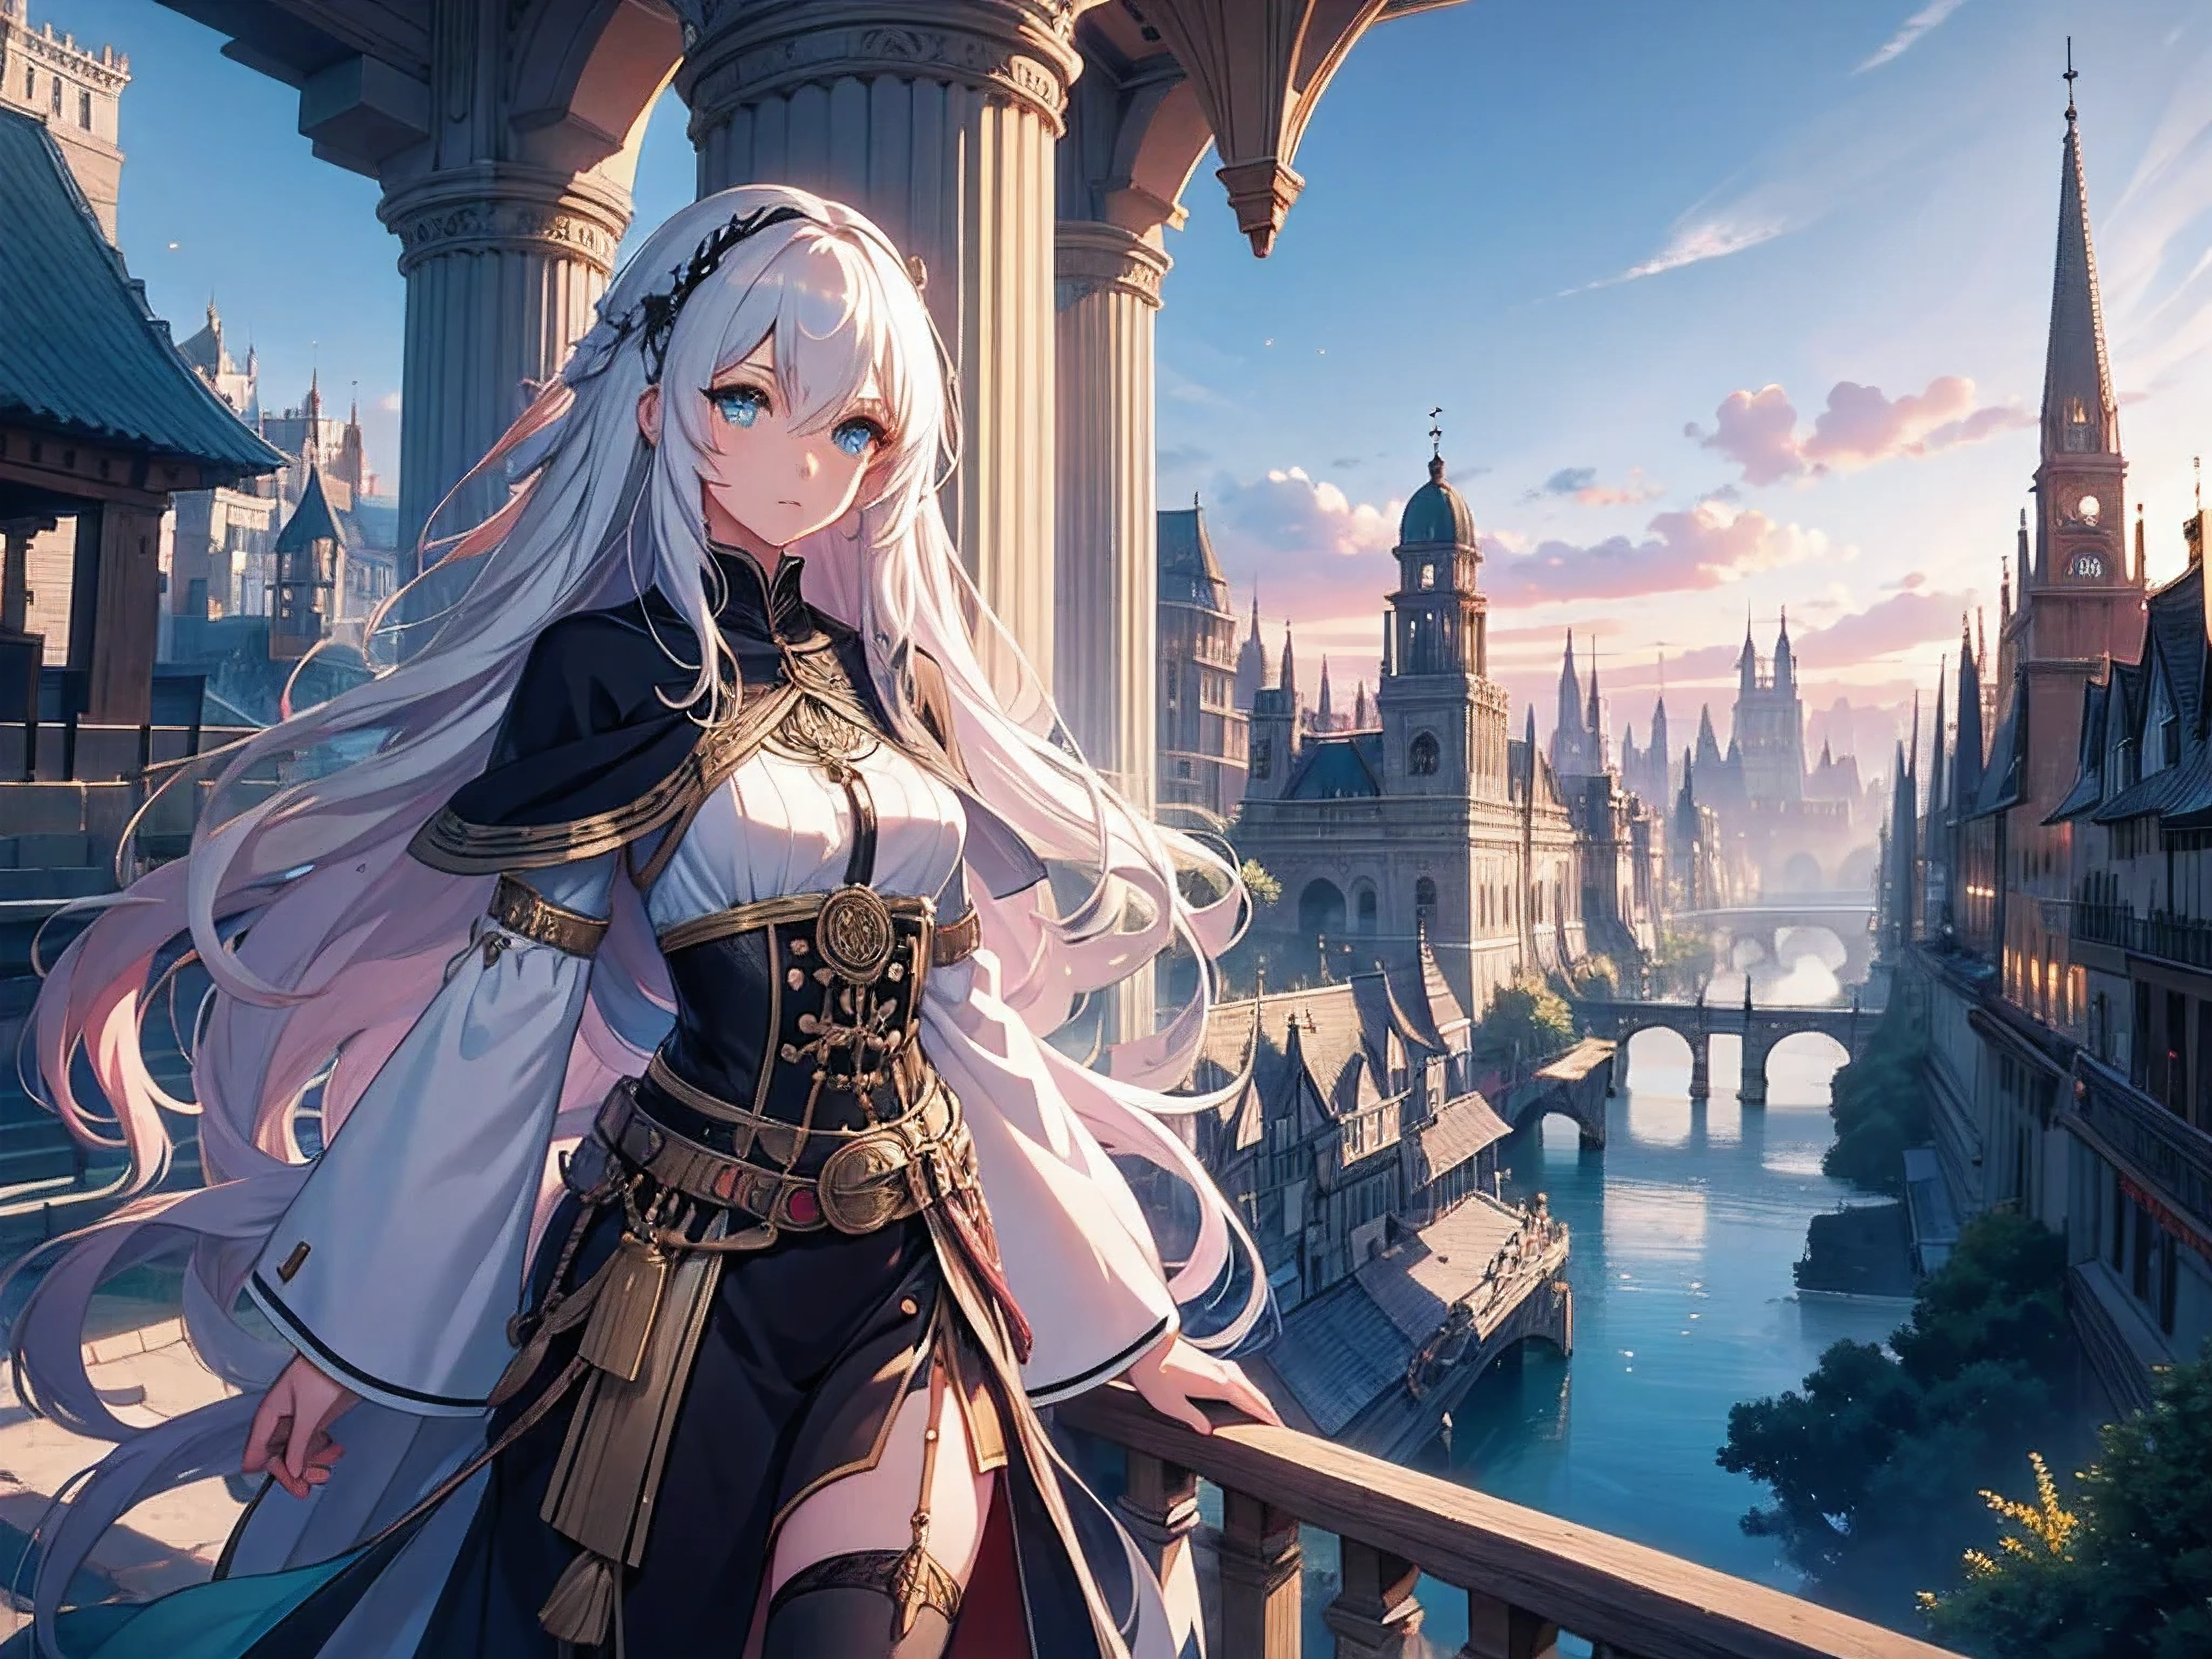 anime girl with long white hair sitting on a ledge looking at a city, 2. 5 d cgi anime fantasy illustrations, anime fantasy illustrations, anime fantasy illustration, Android girl in Egyptian ruins, beautiful fantasy anime, High quality 8K detailed art, In front of a fantasy city, a beautiful fantasy empress, artwork in the style of guweiz, 4K anime style
